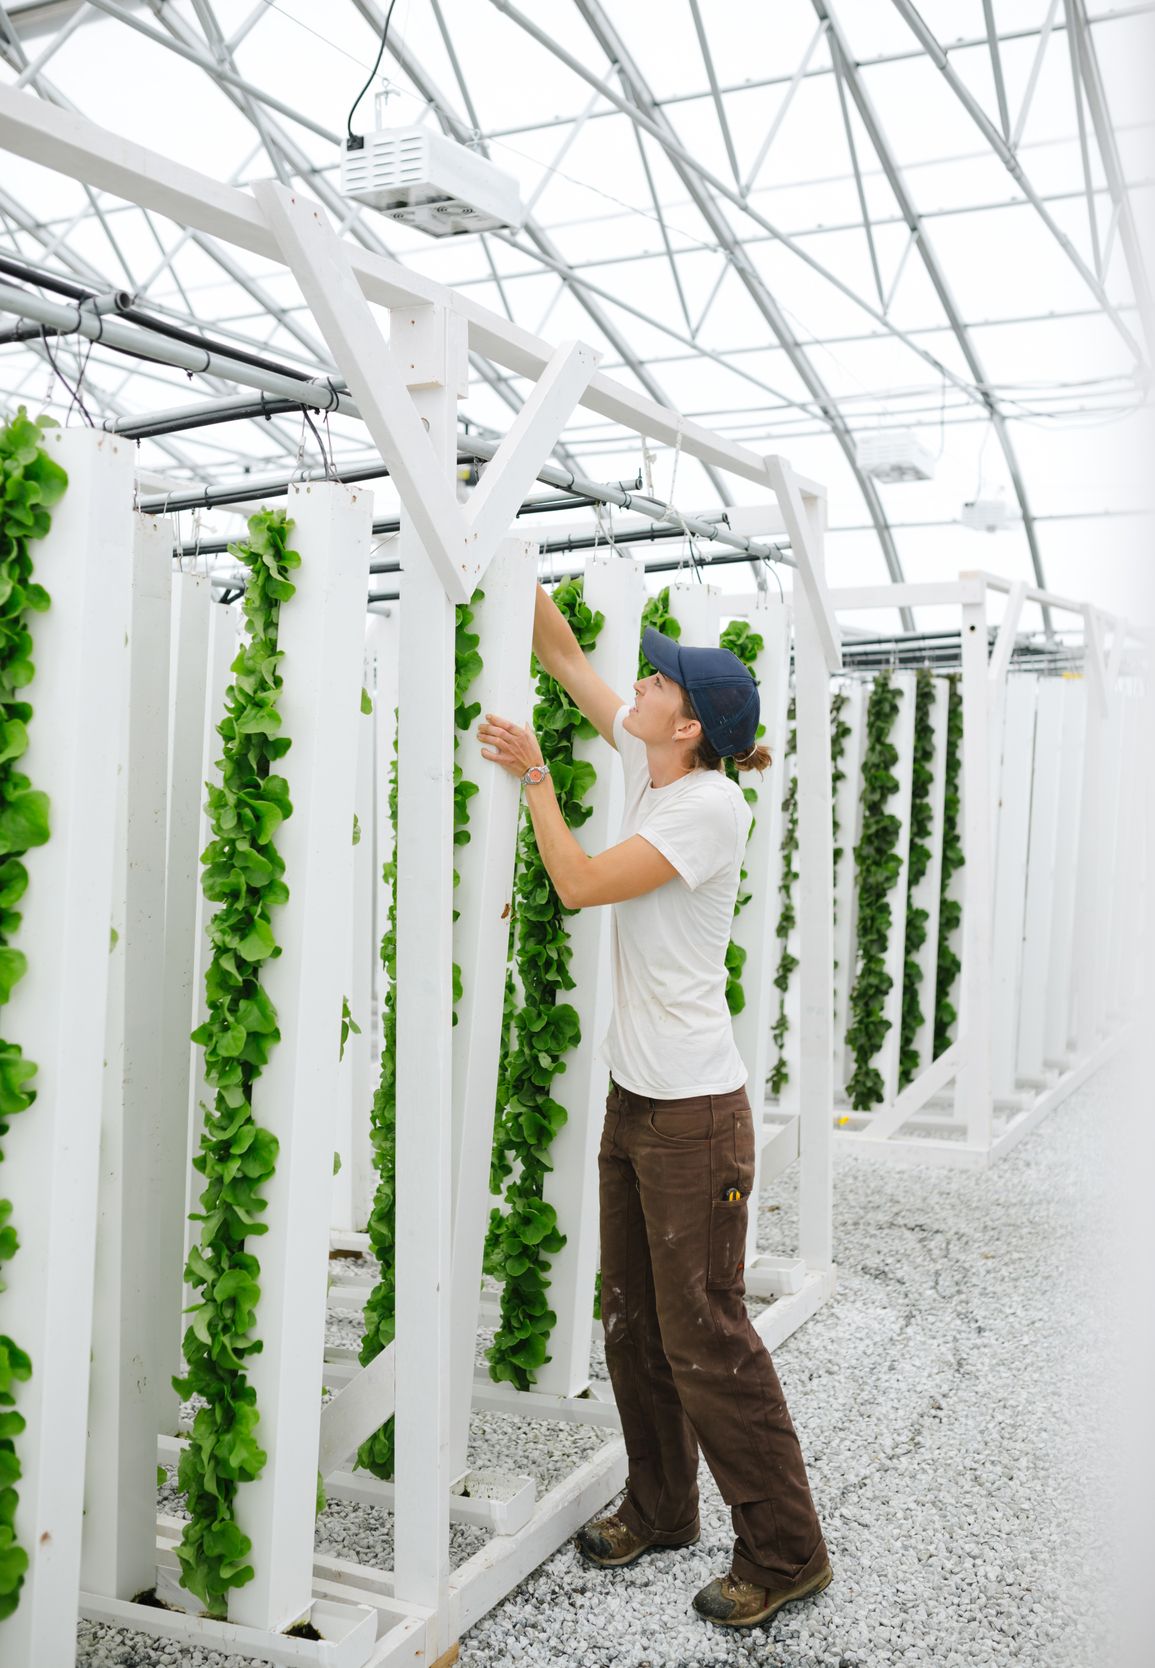 A farmer checking crops growing inside of a greenhouse